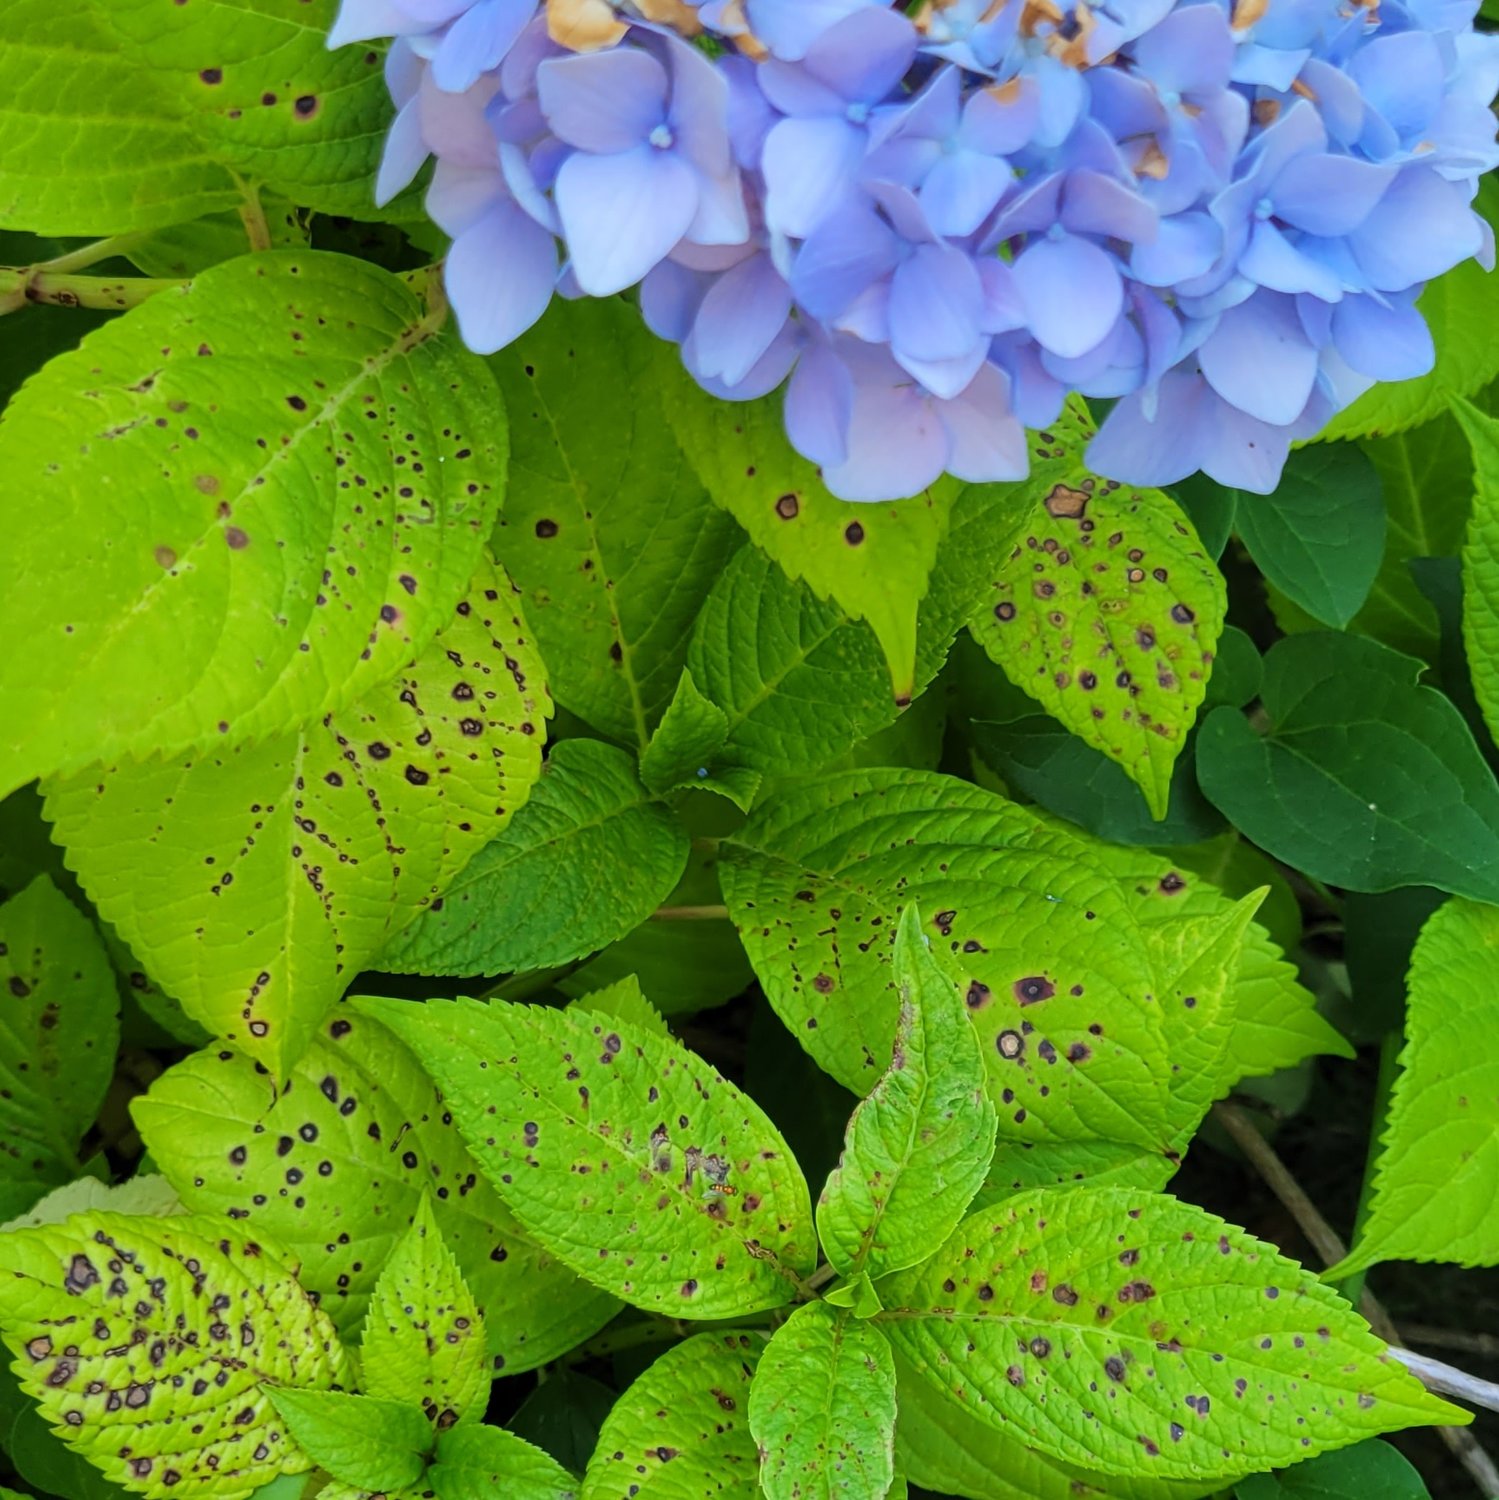 Leaf spot disease might not cause long-term harm to hydrangeas, but the bright green foliage covered with small, dark spots is certainly unsightly.